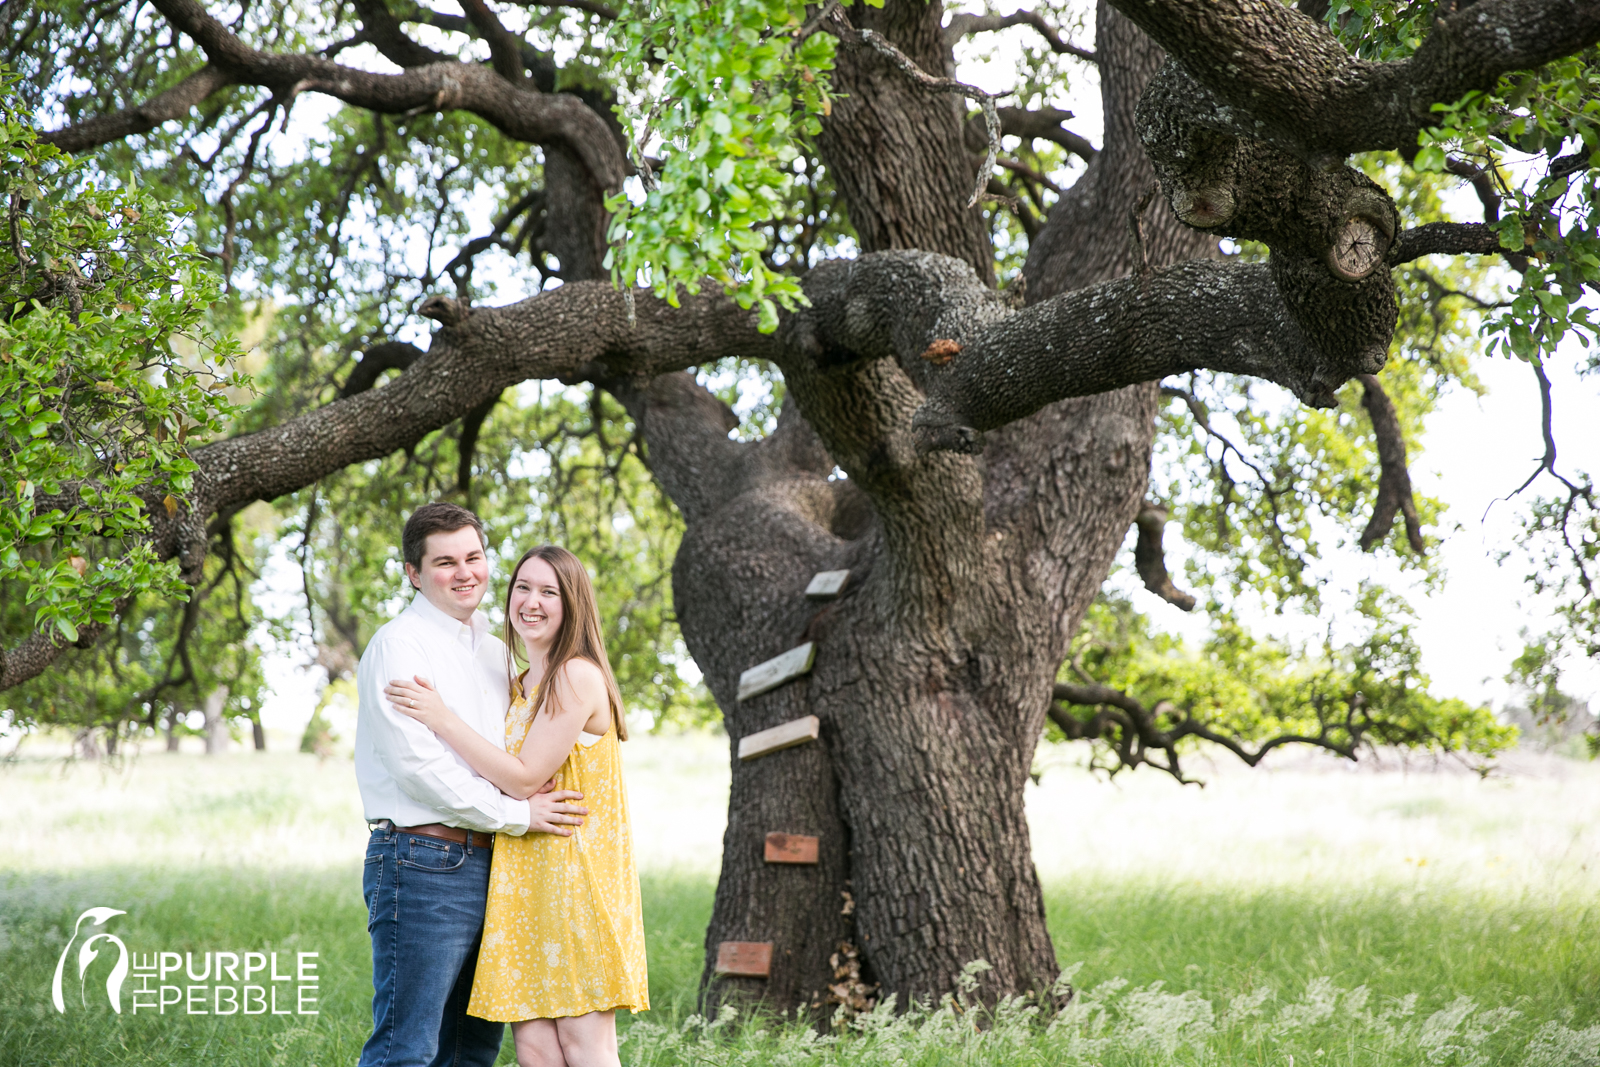 Outdoor Nature Engagement Session